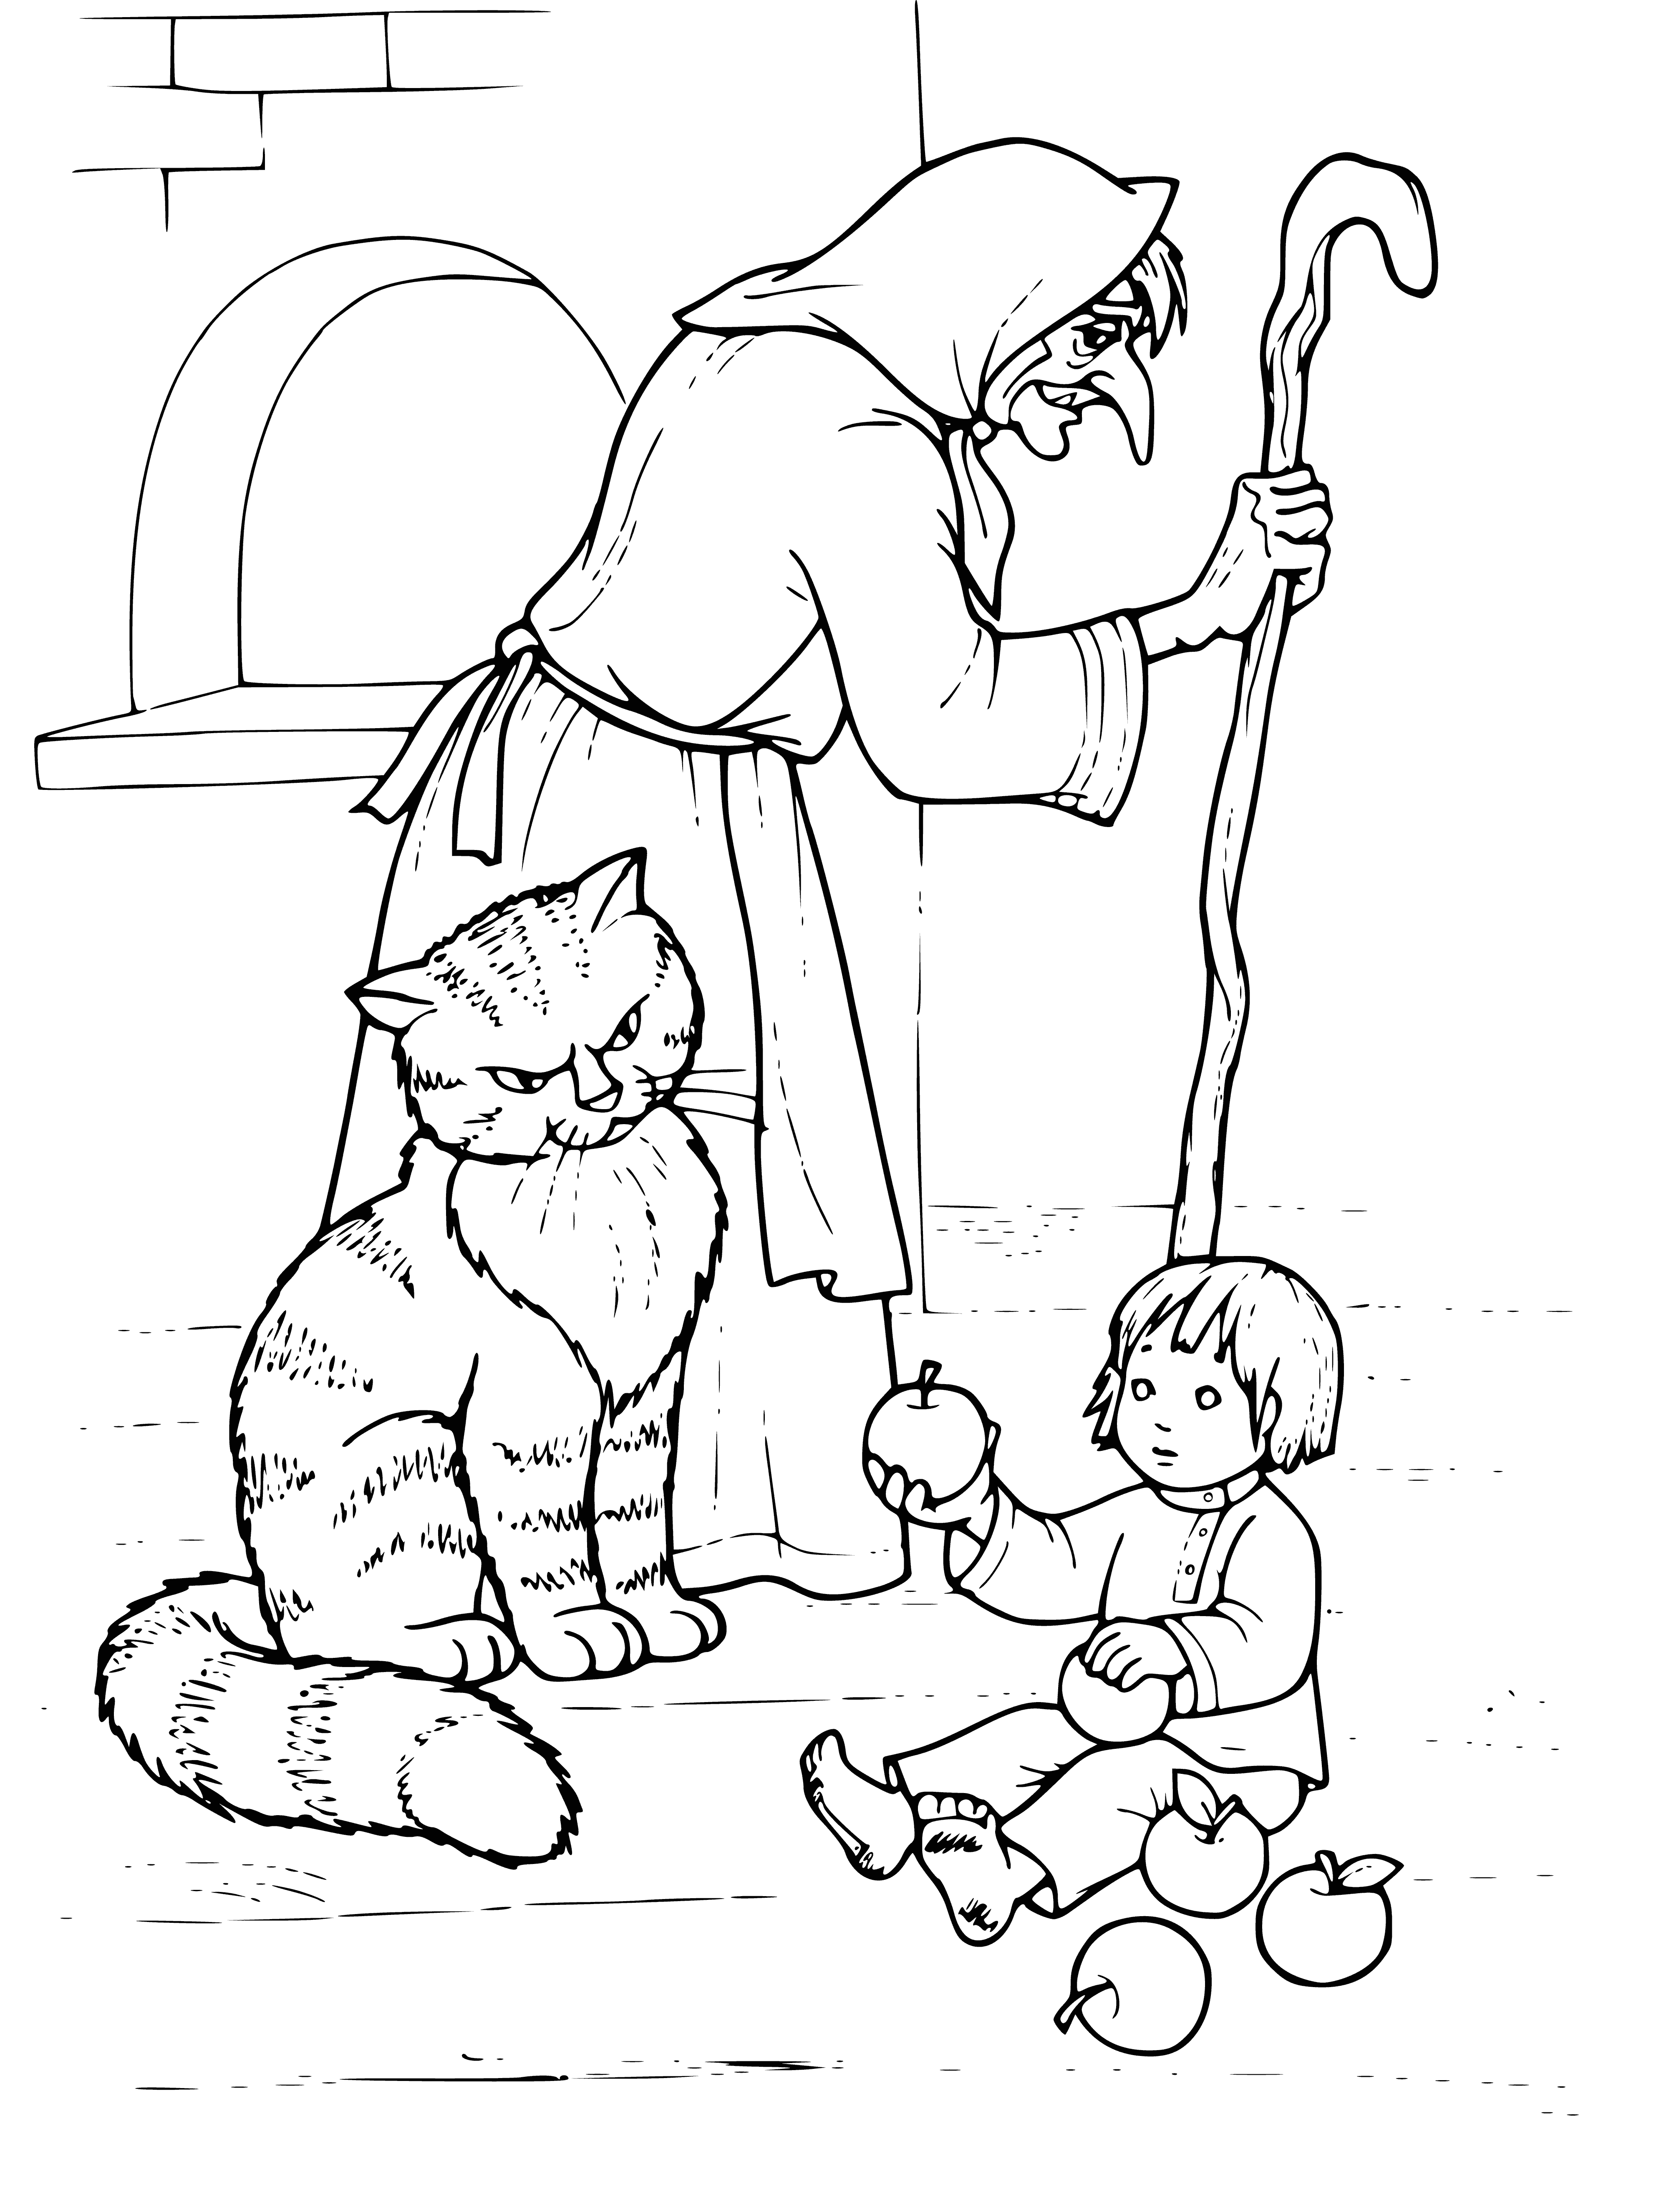 coloring page: Baba Yaga is a popular divine crone in Russian folklore; her hut made of human bones and surrounded by a fence of skulls are symbolic of her power to help or harm.